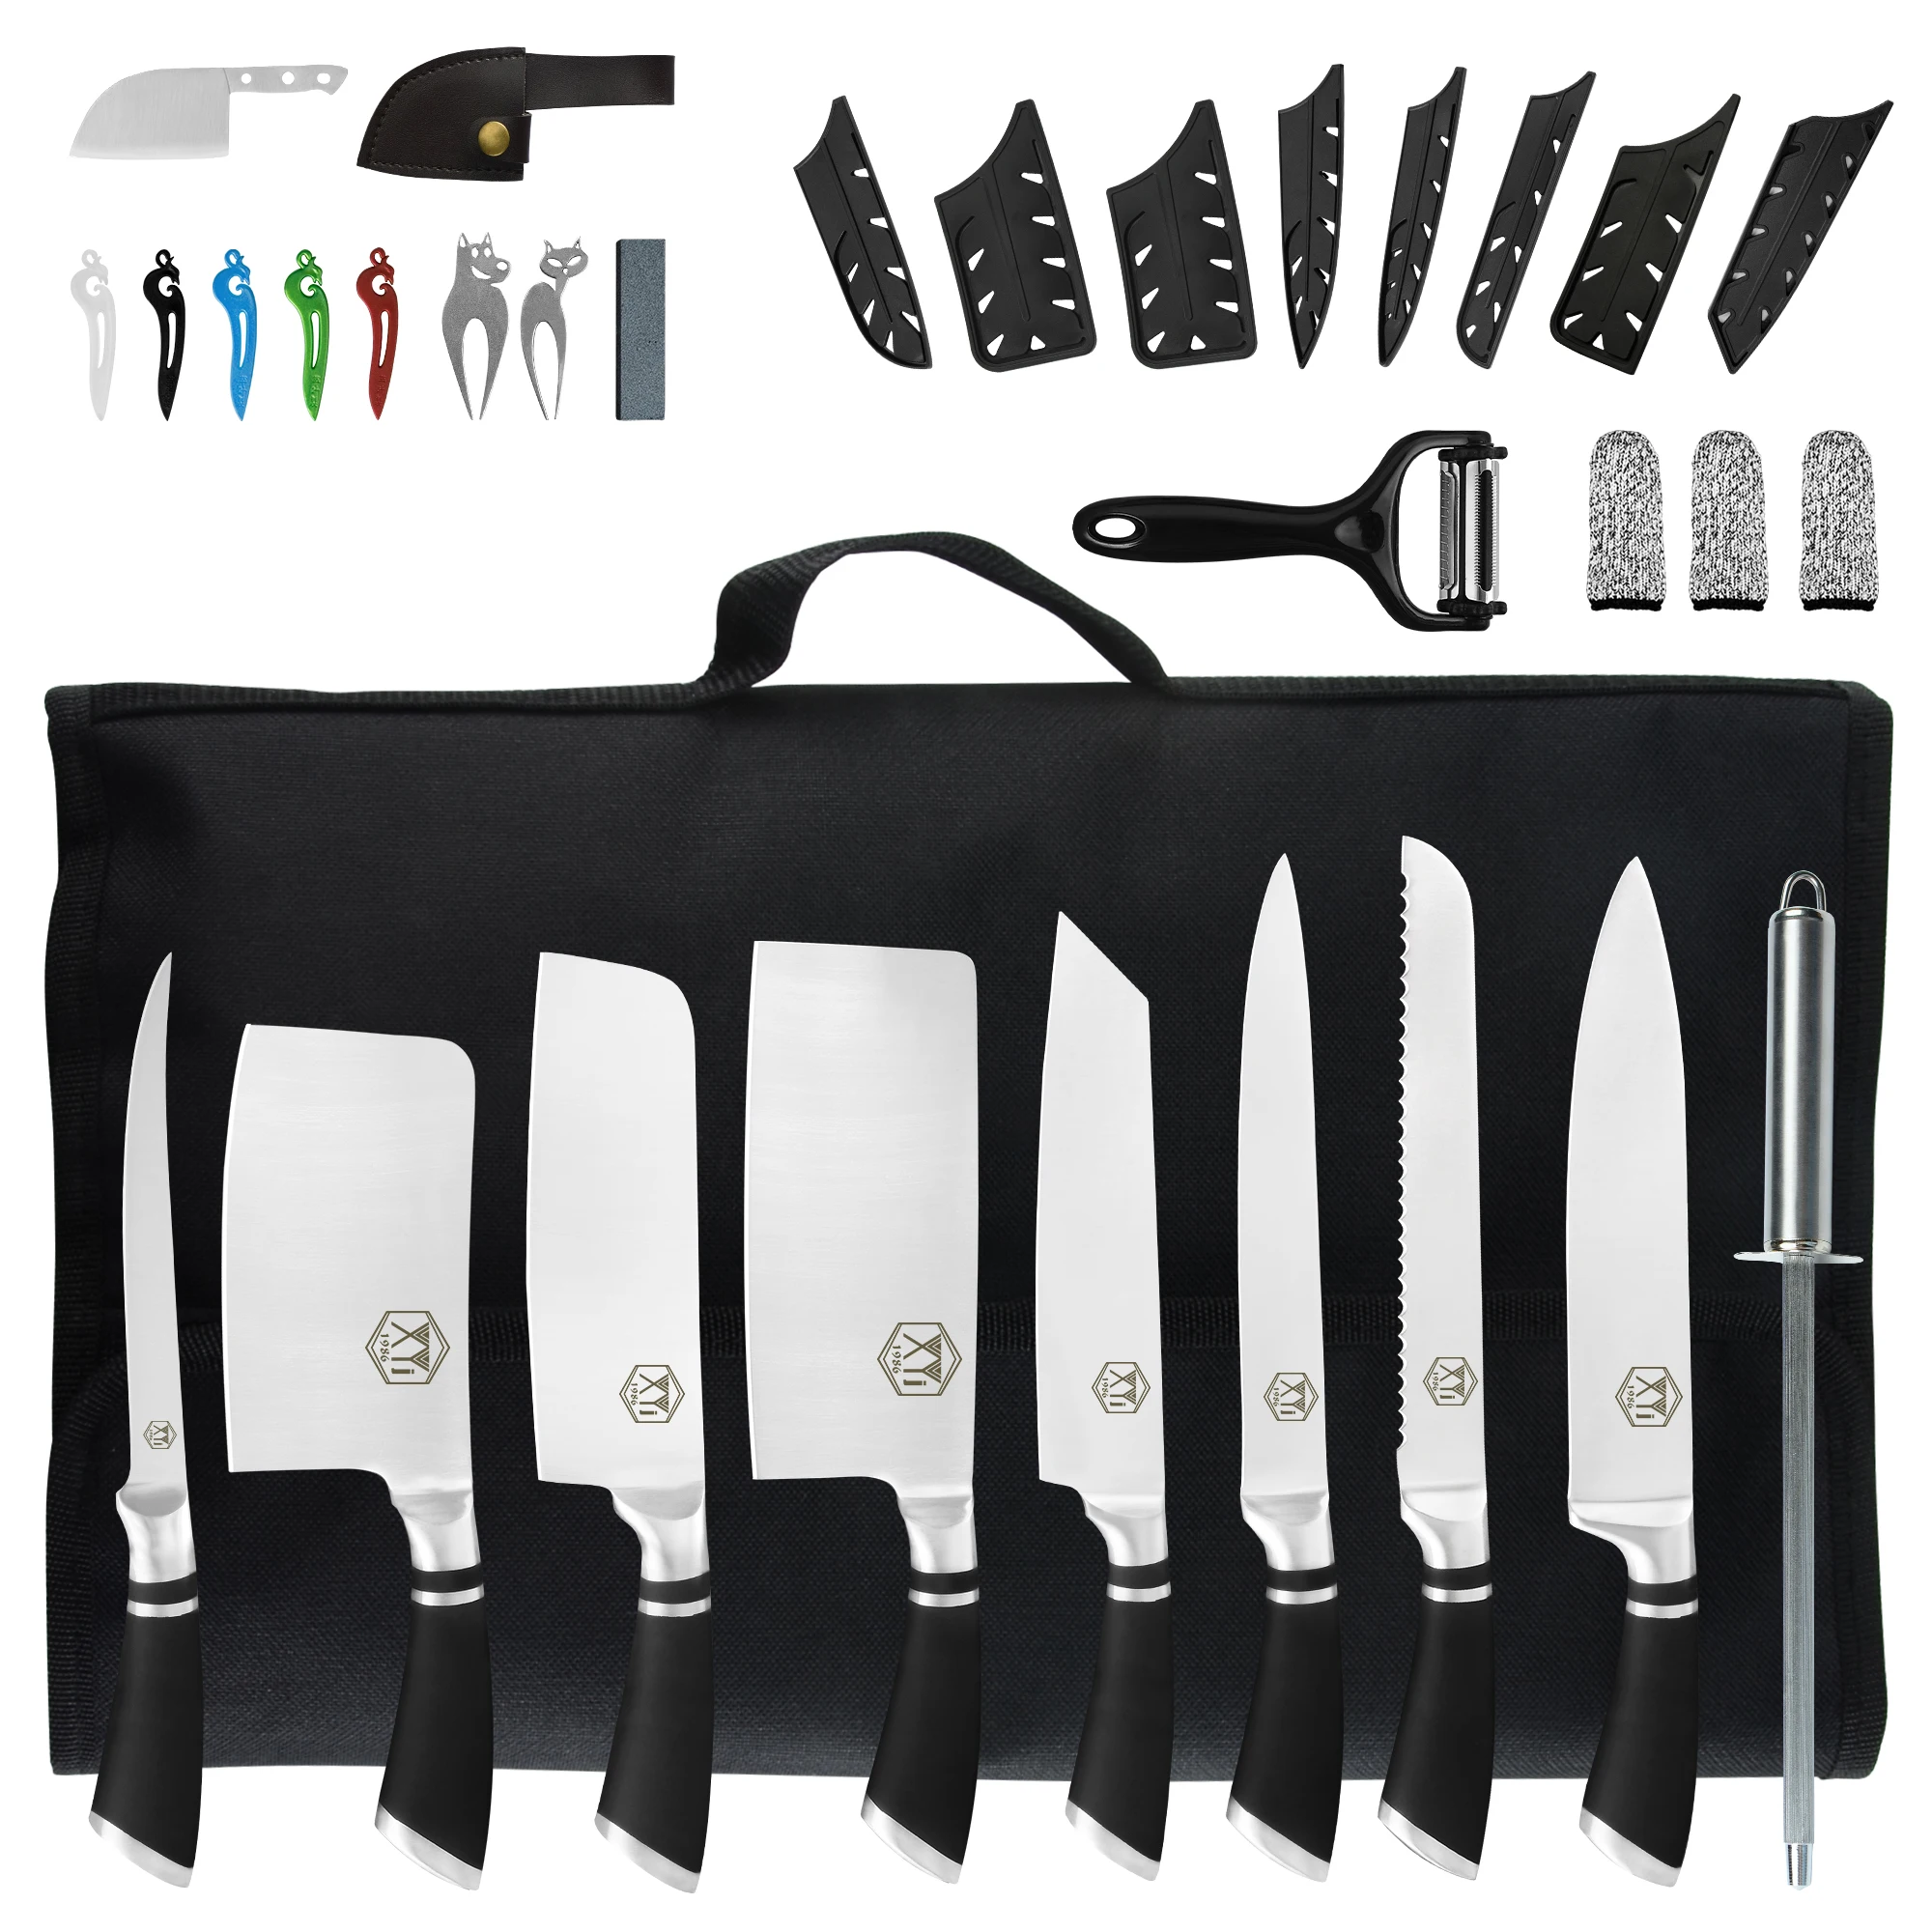 

XYj Stainless Steel 13Pcs Chef Knives Set Cooking Tools Multi-Function Kitchen Knives Durable Sharp Blade Non-Slip Knives Handle